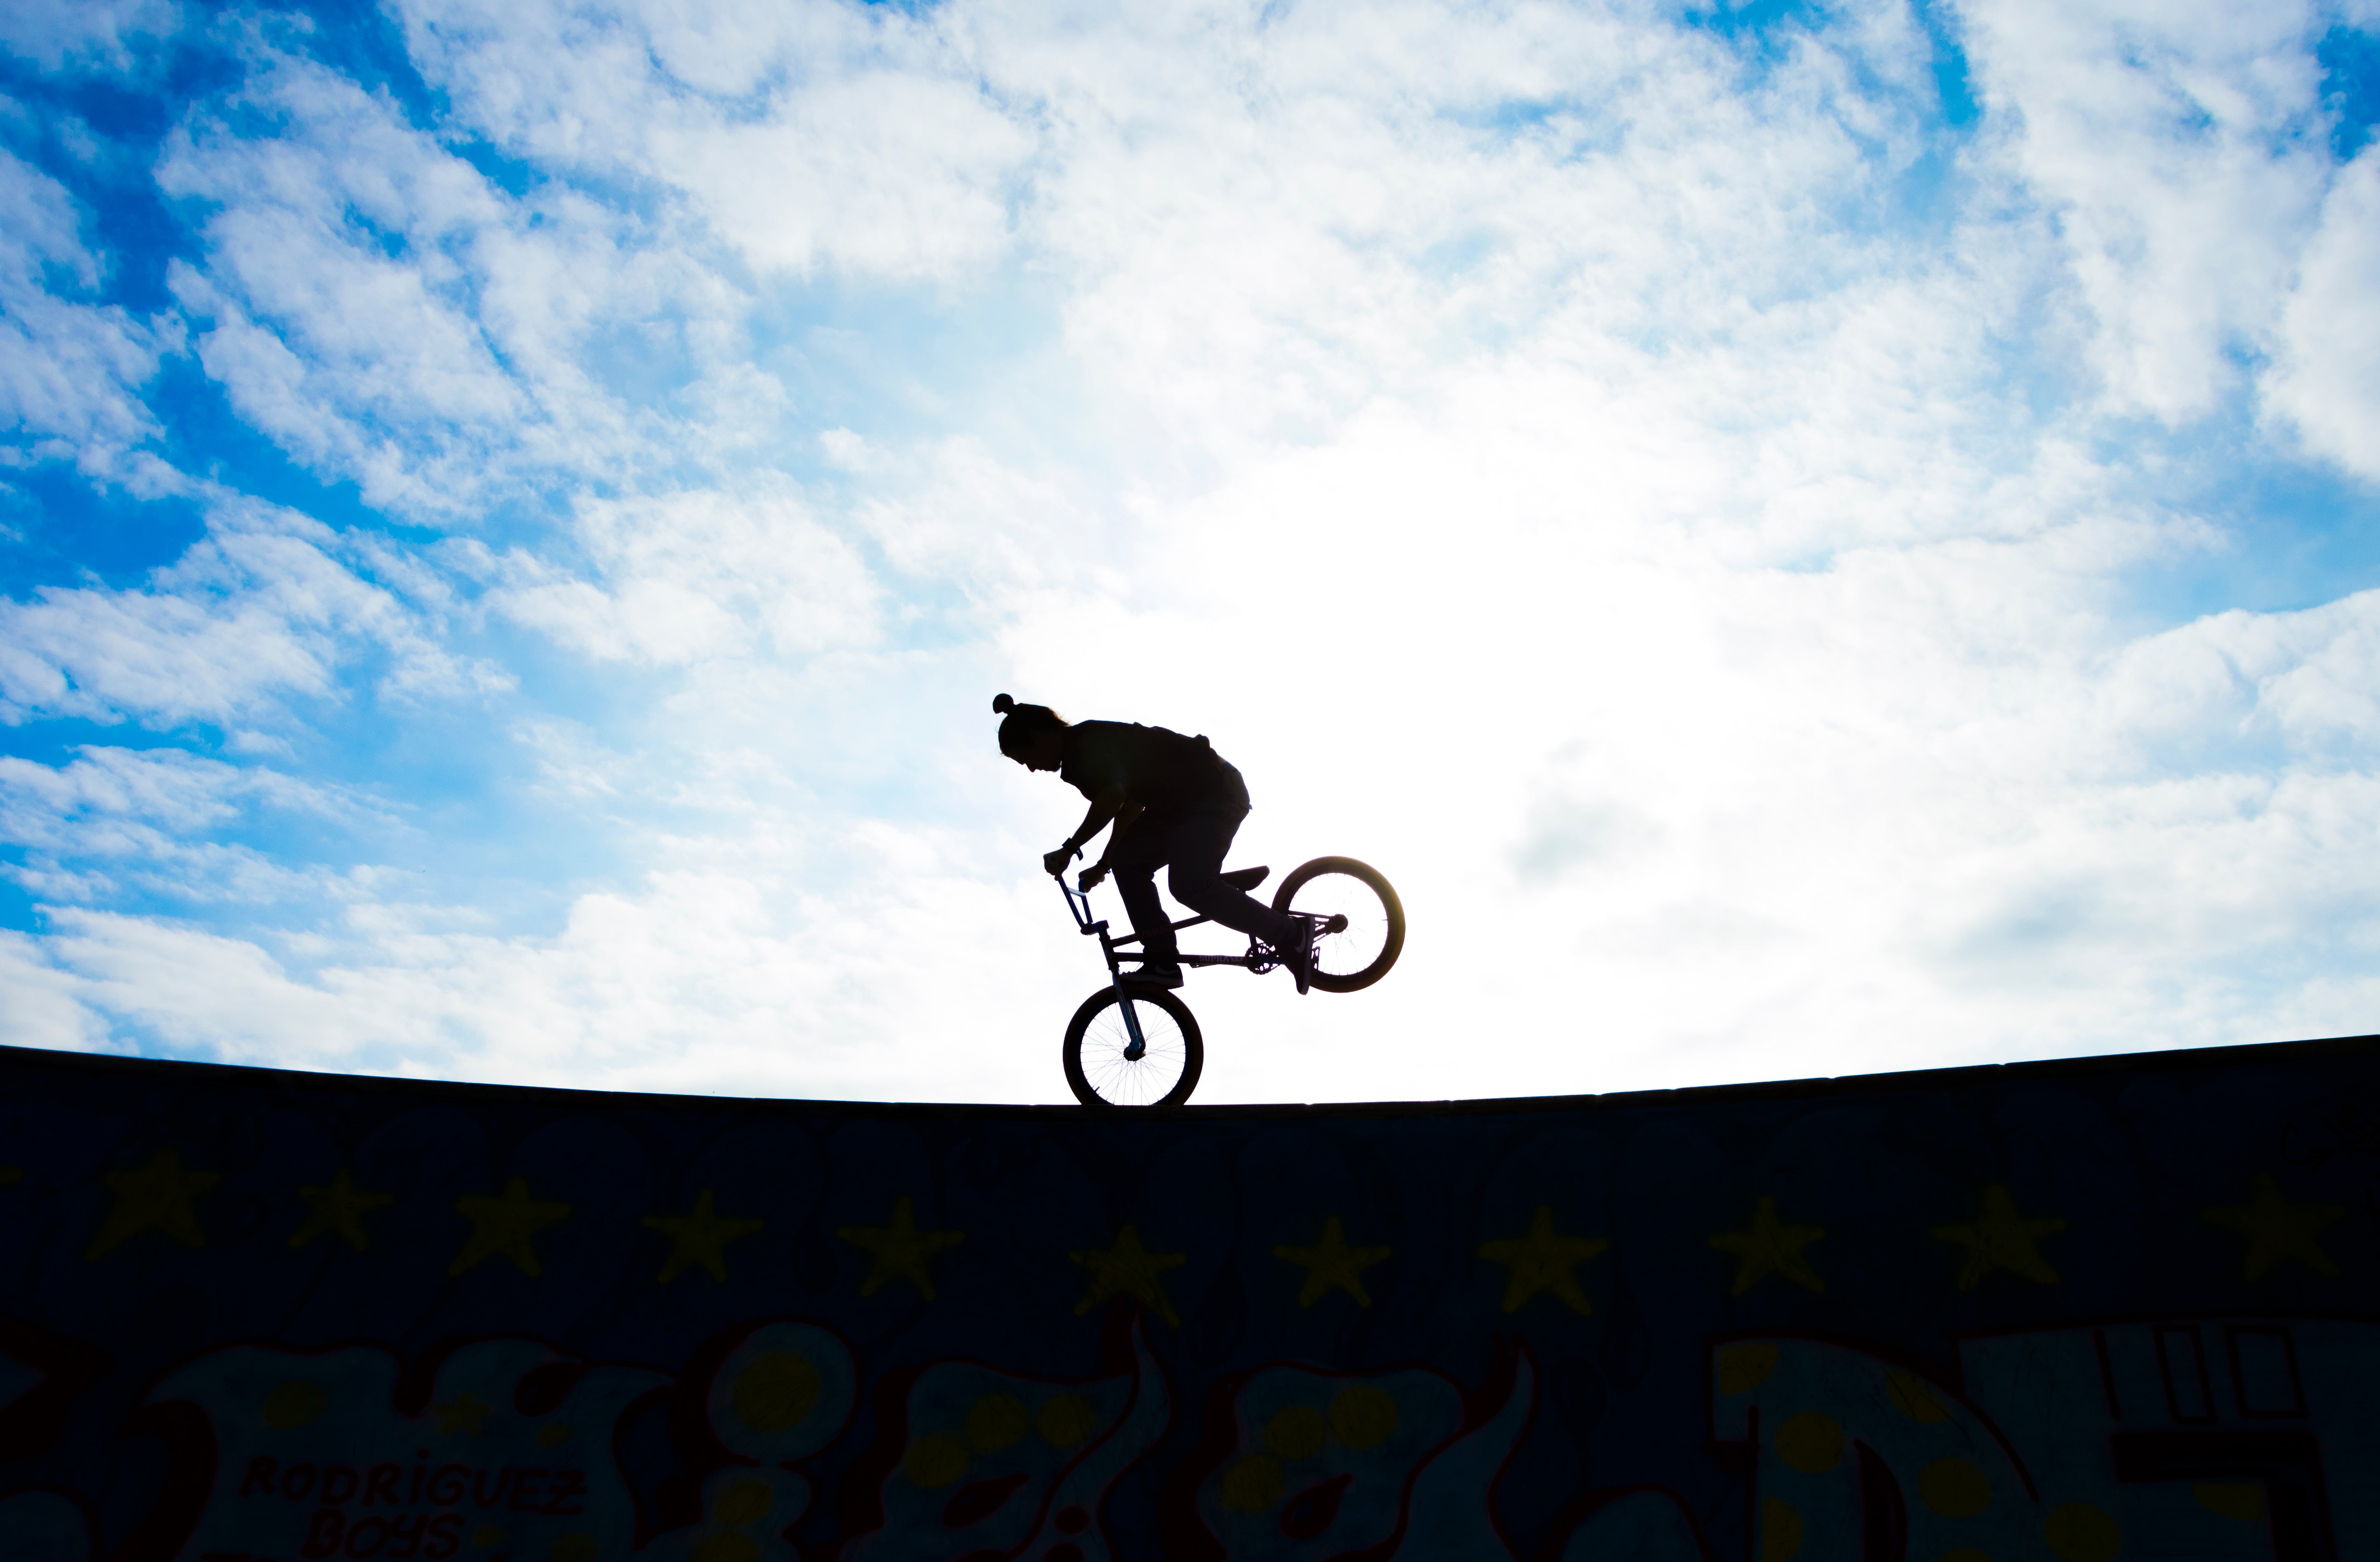 photo of silhouette of person using BMX bike